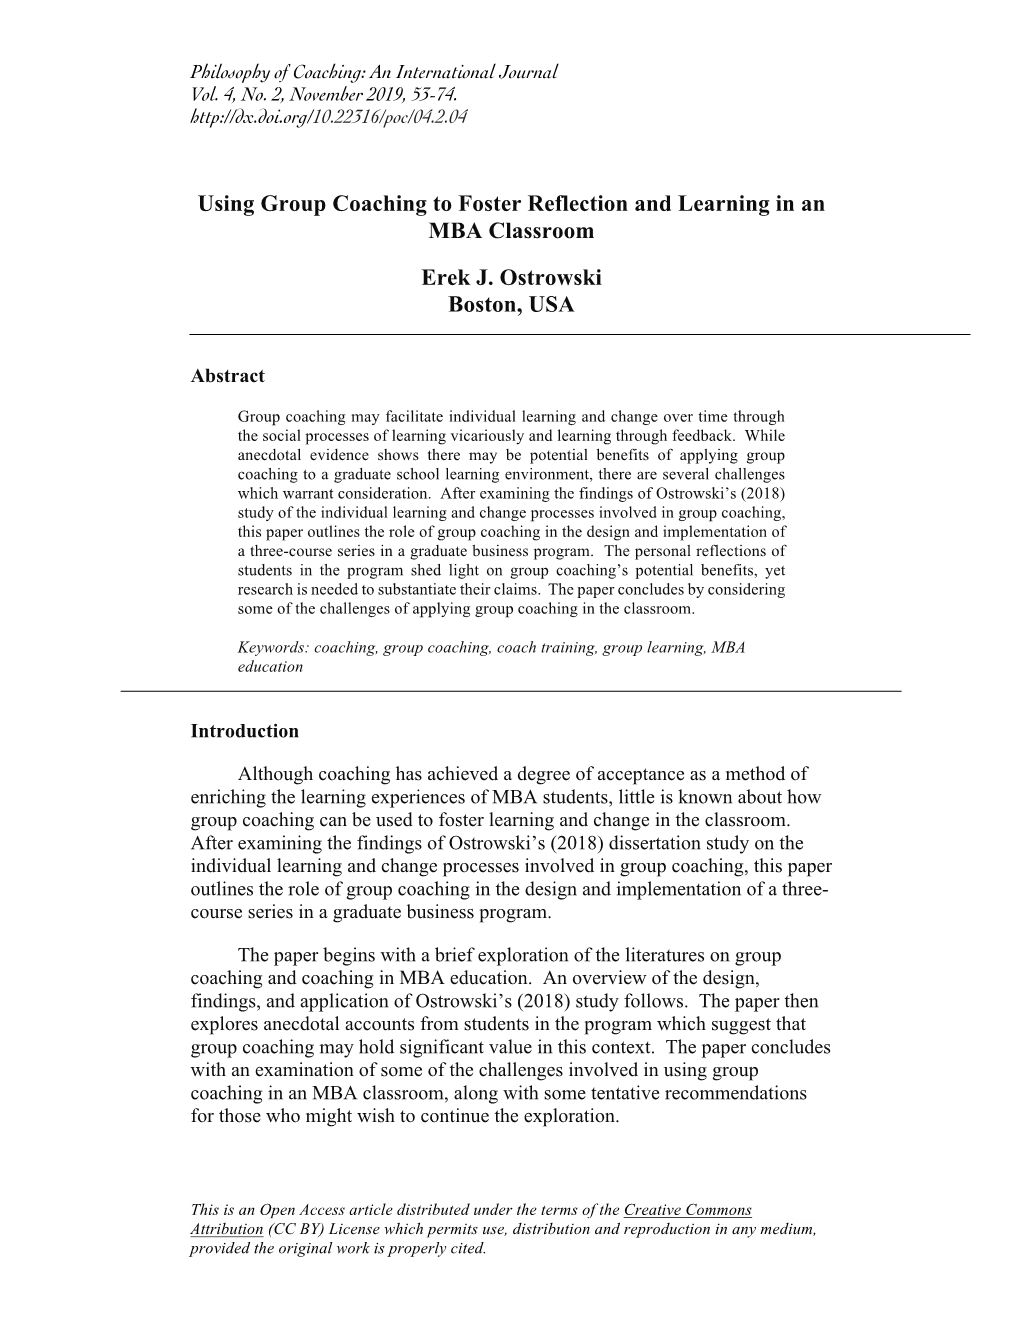 Using Group Coaching to Foster Reflection and Learning in an MBA Classroom